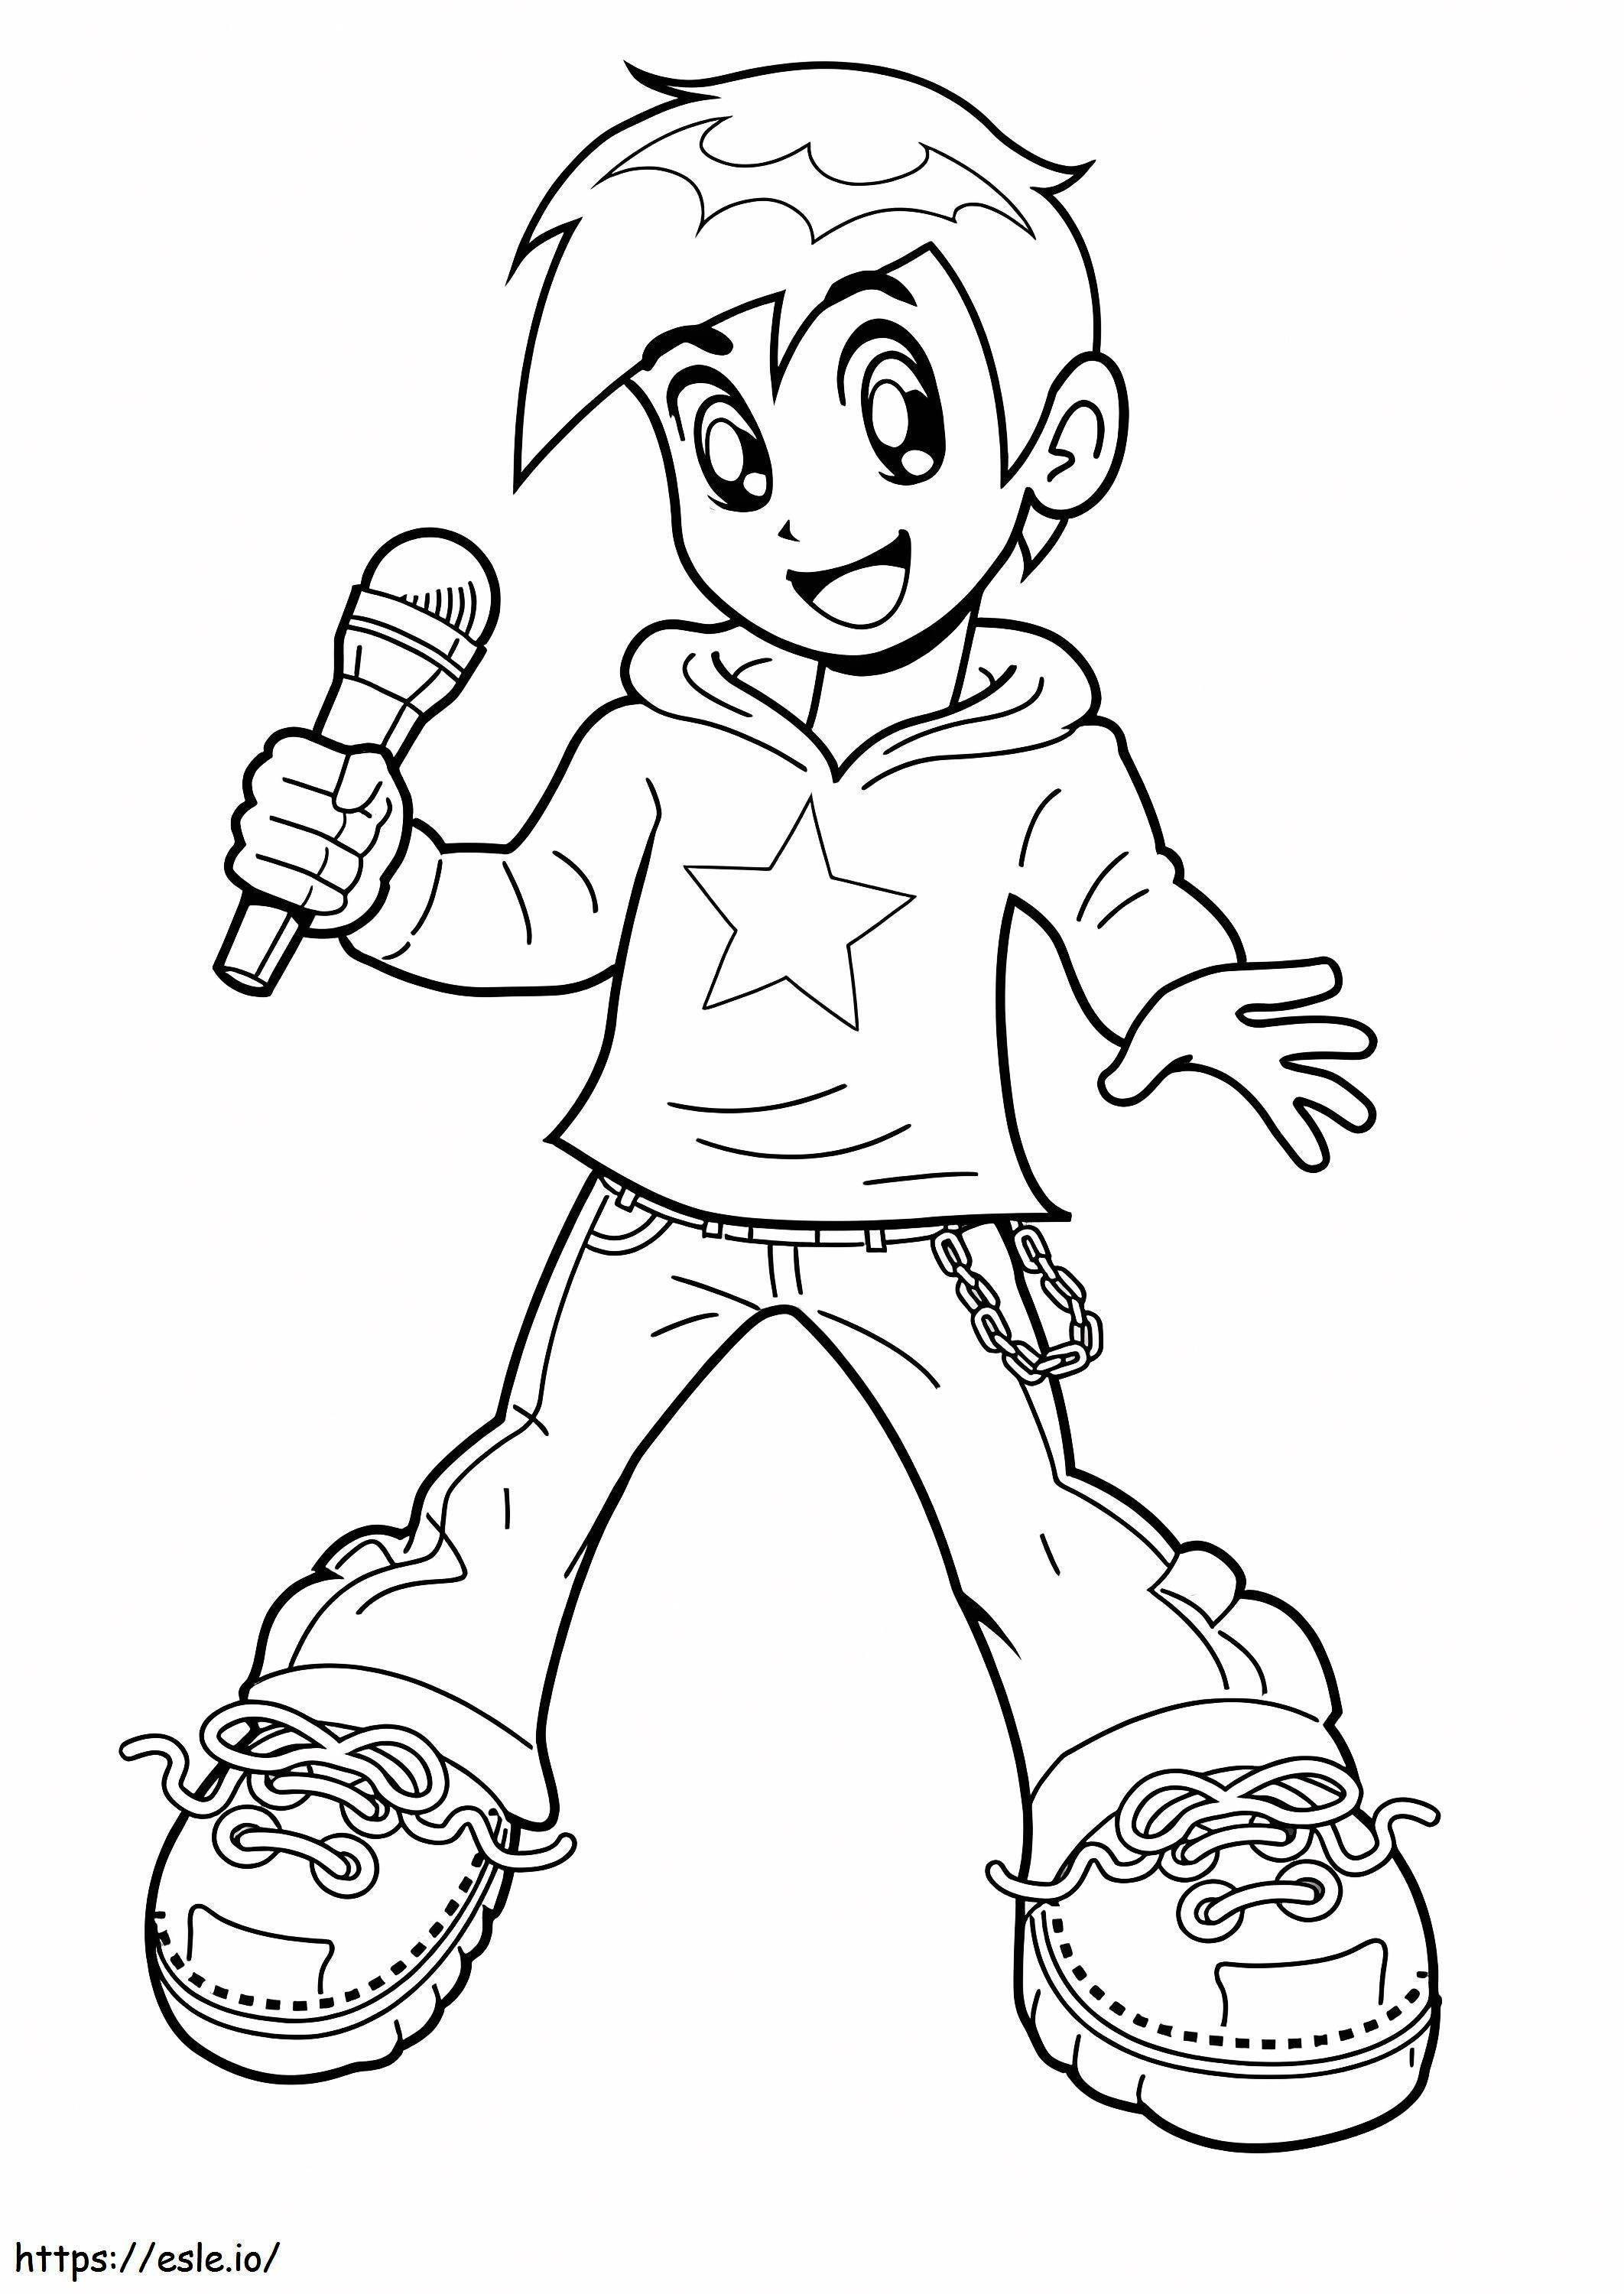 Cute Singer 1 coloring page